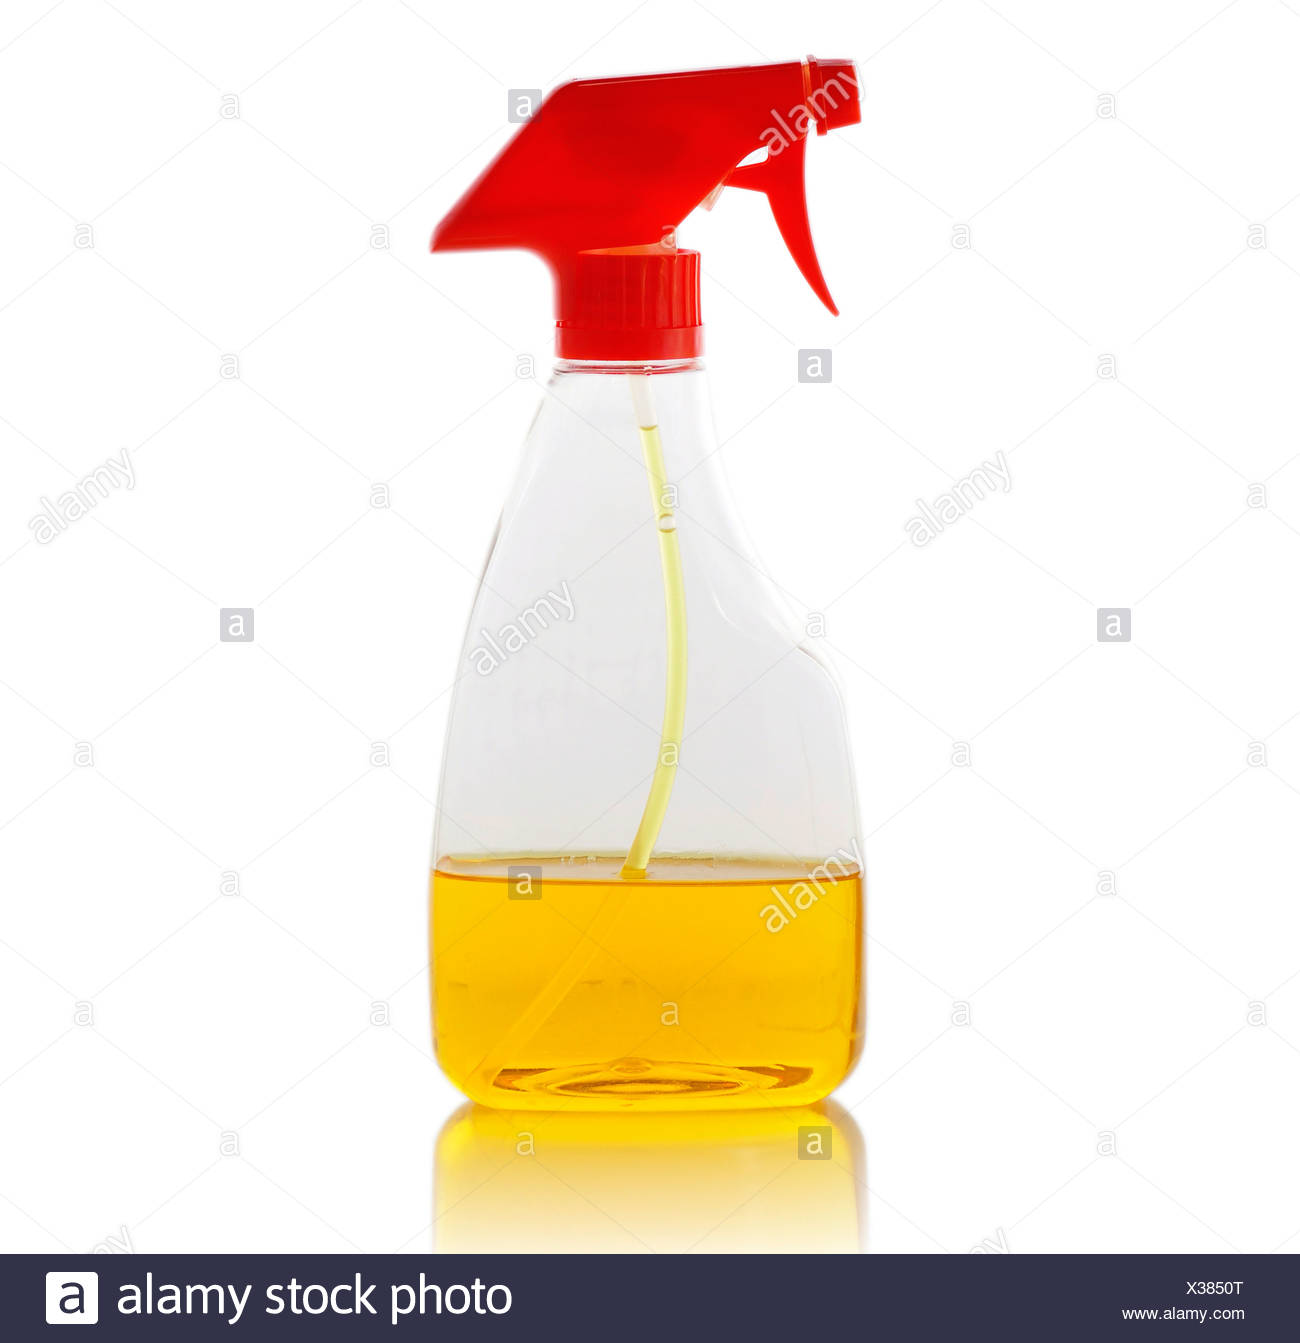 Download Spray Bottle With Yellow Liquid Stock Photo Alamy Yellowimages Mockups